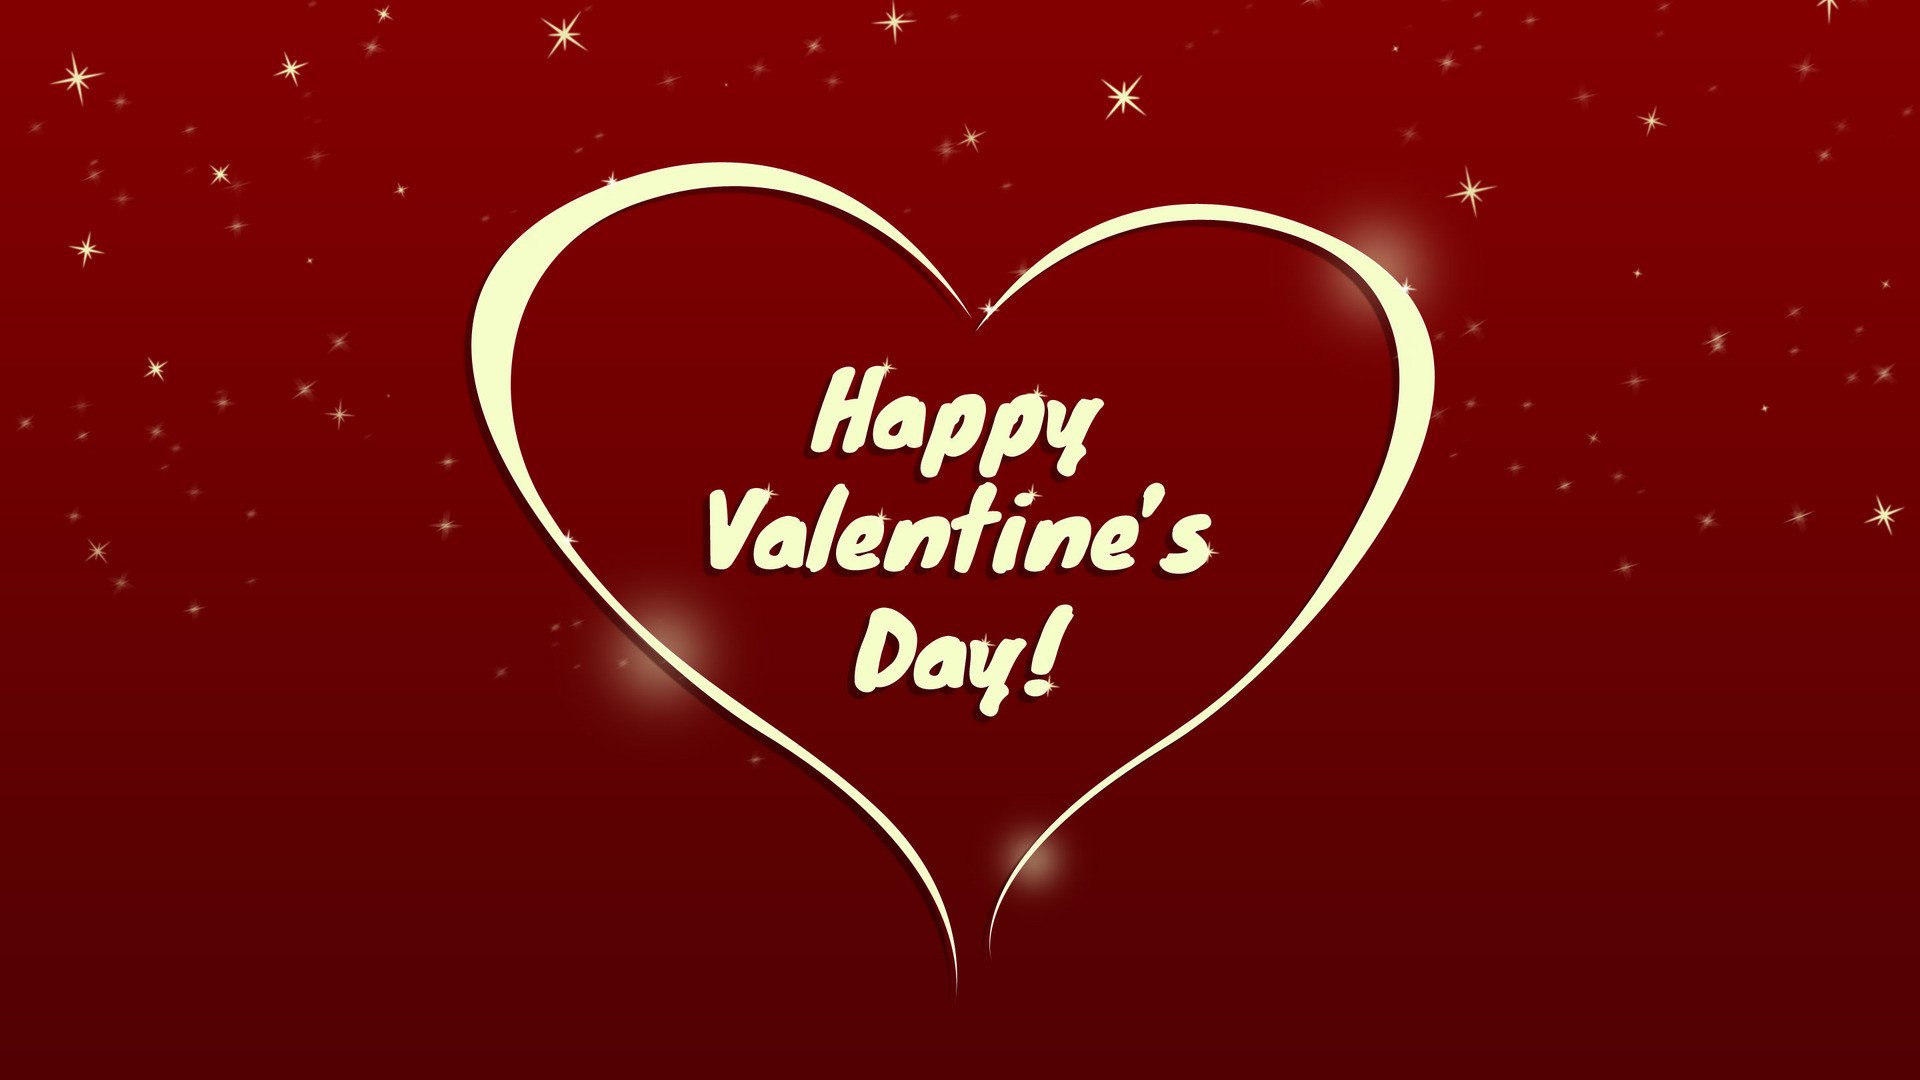 Happy Valentines Day Wallpaper [10 Best] Valentine S Day Pc Wallpapers to Make the Mood